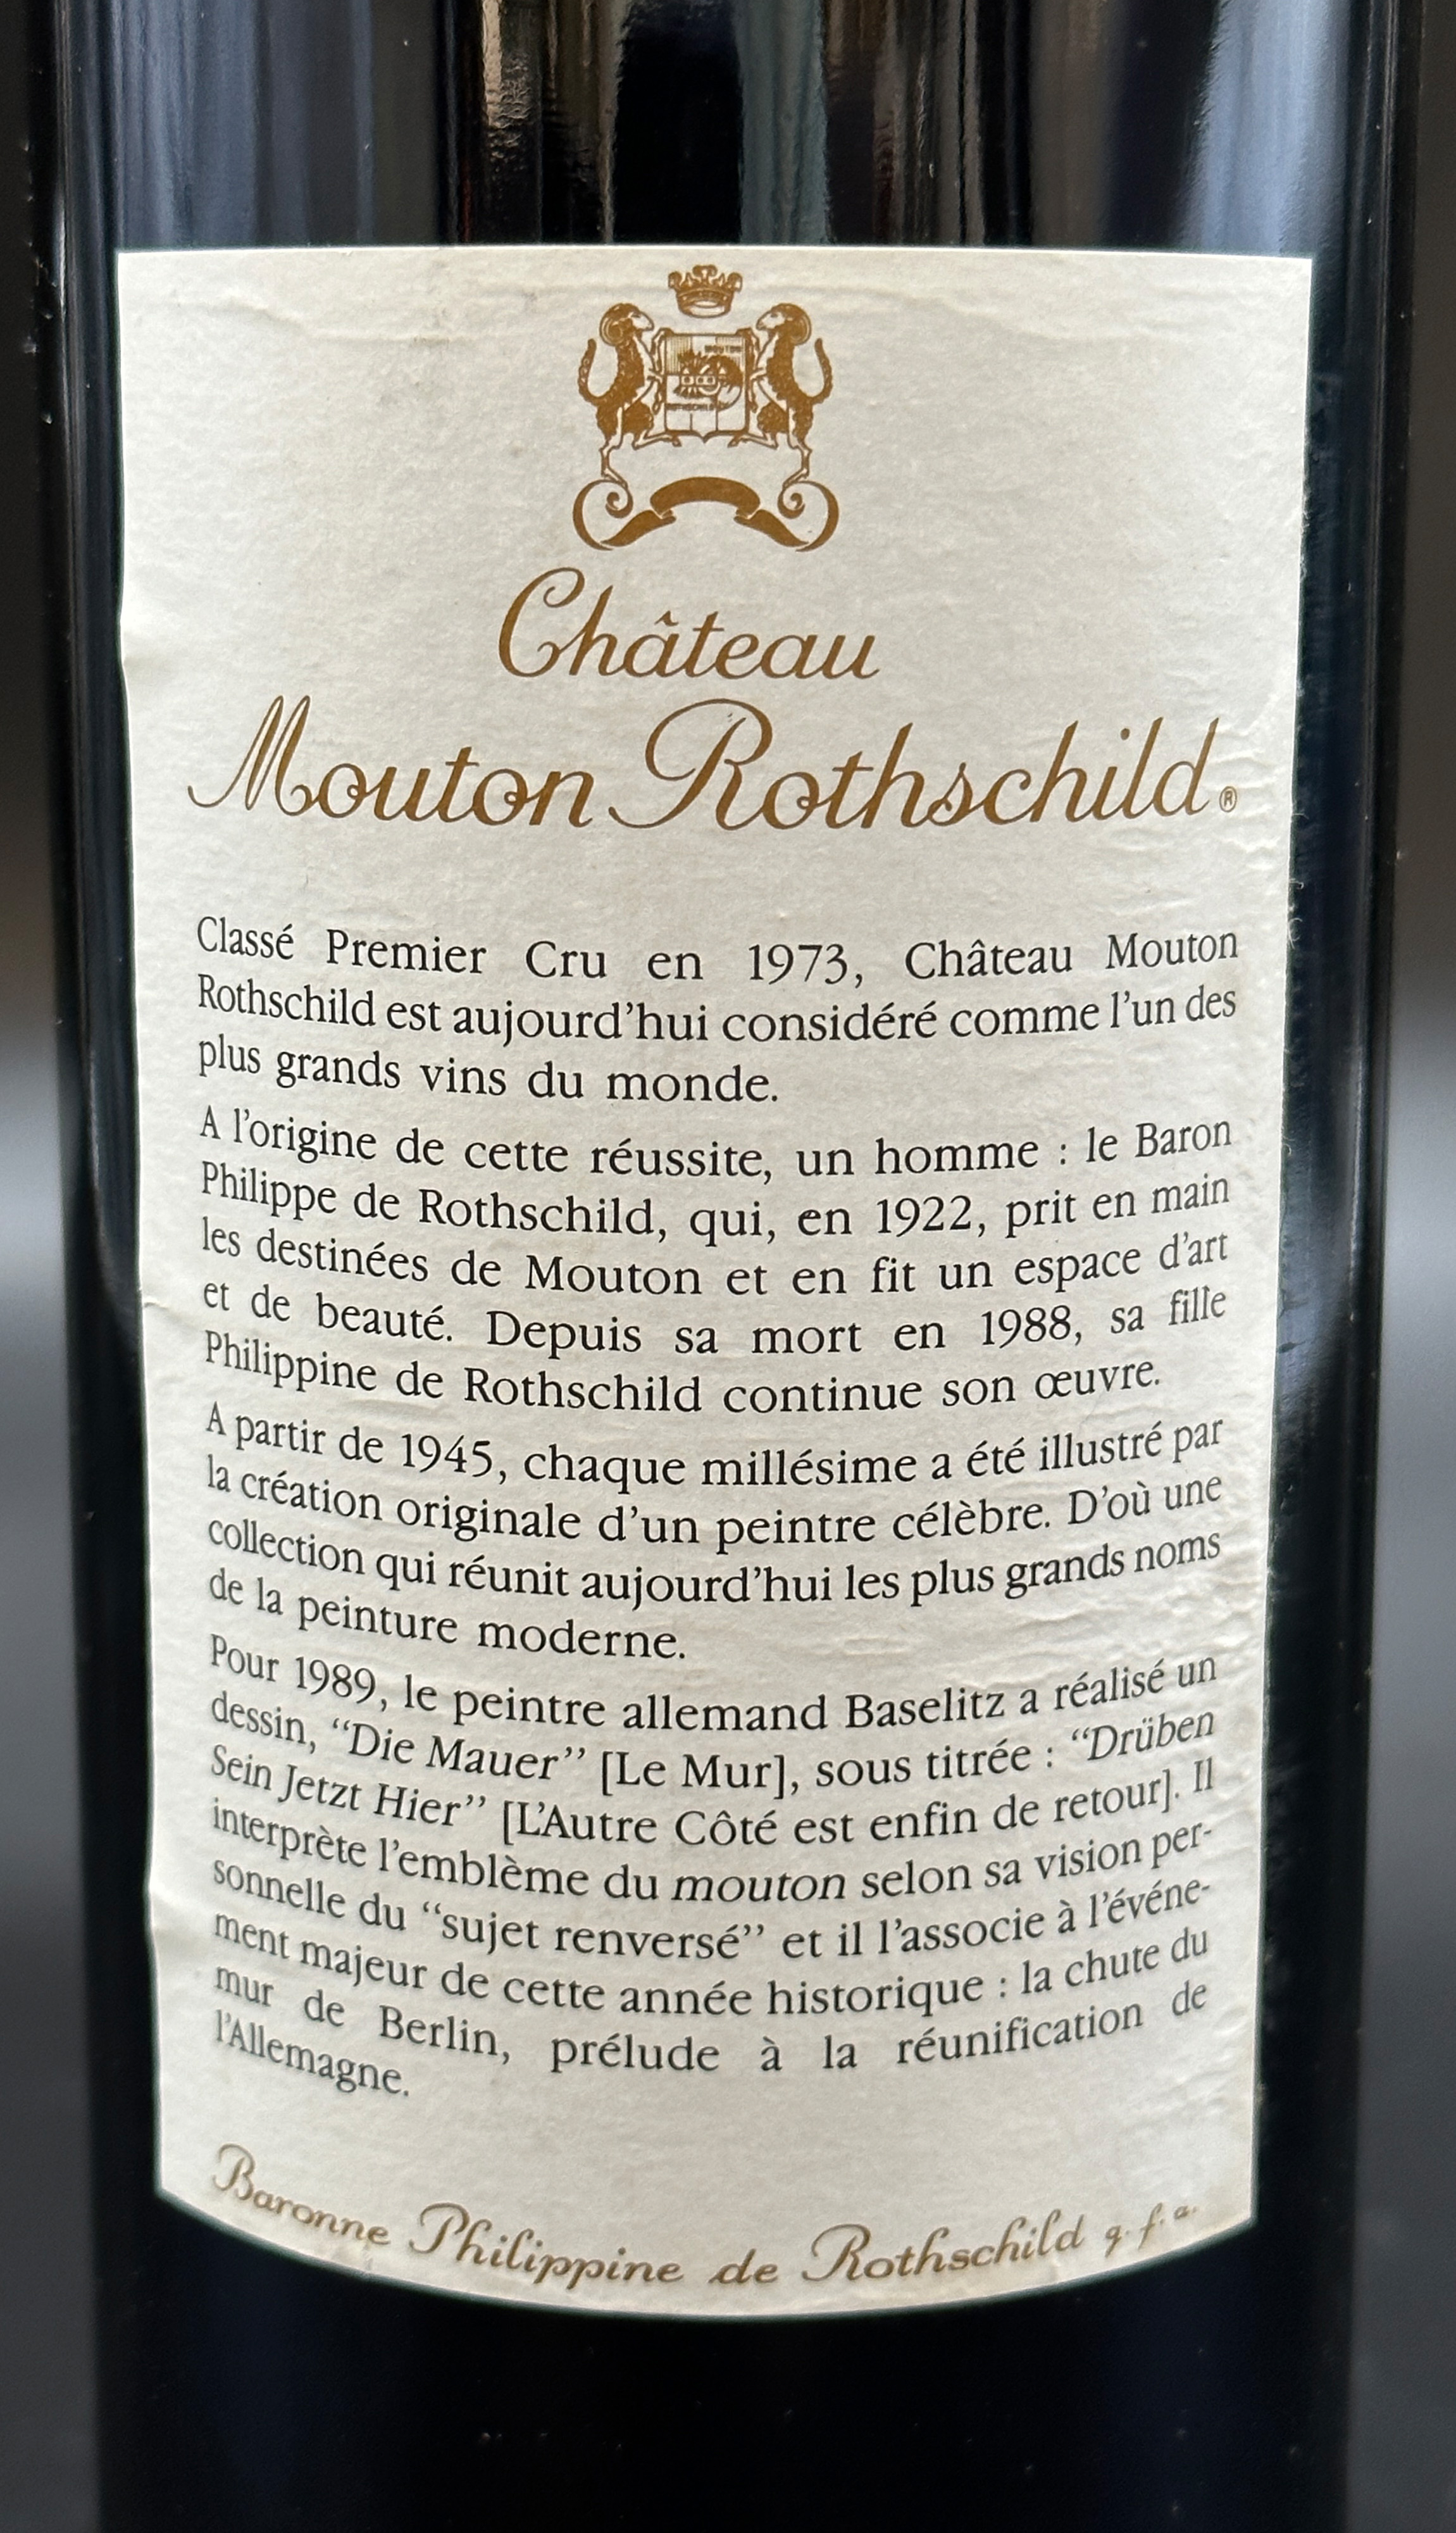 1 bottle of red wine. Château Mouton ROTHSCHILD. Paulliac. 1989. France. - Image 3 of 4